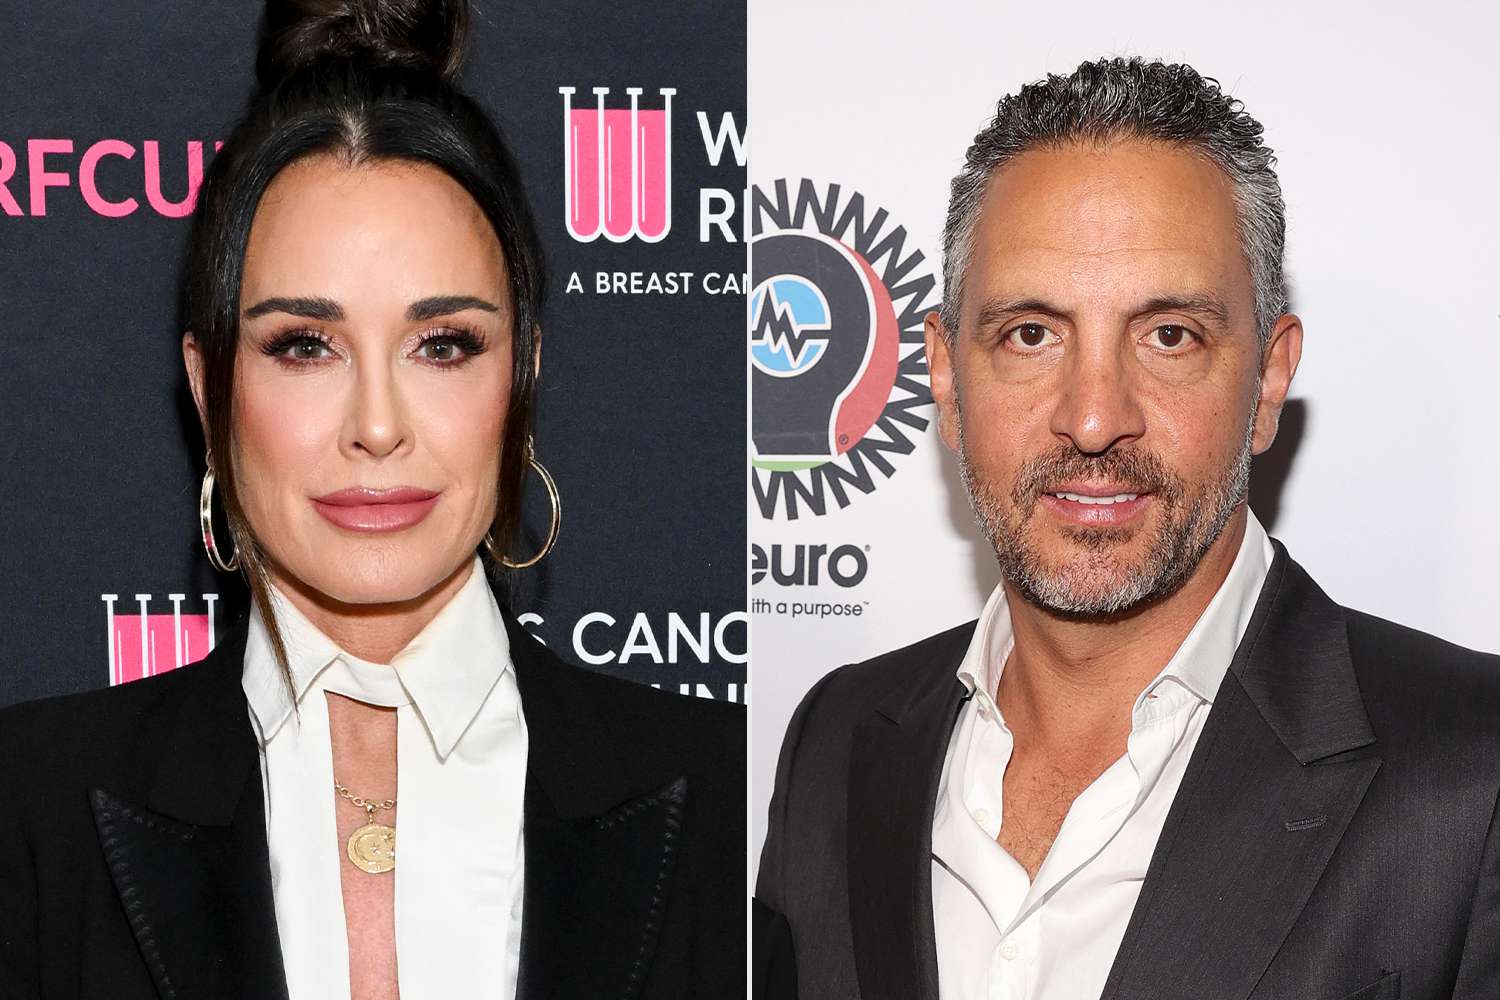 ...Kyle Richards Confirms Return to “RHOBH”, Says She's 'Sure' Estranged Husband Mauricio Umansky Will Appear as 'He’s Obviously Family...